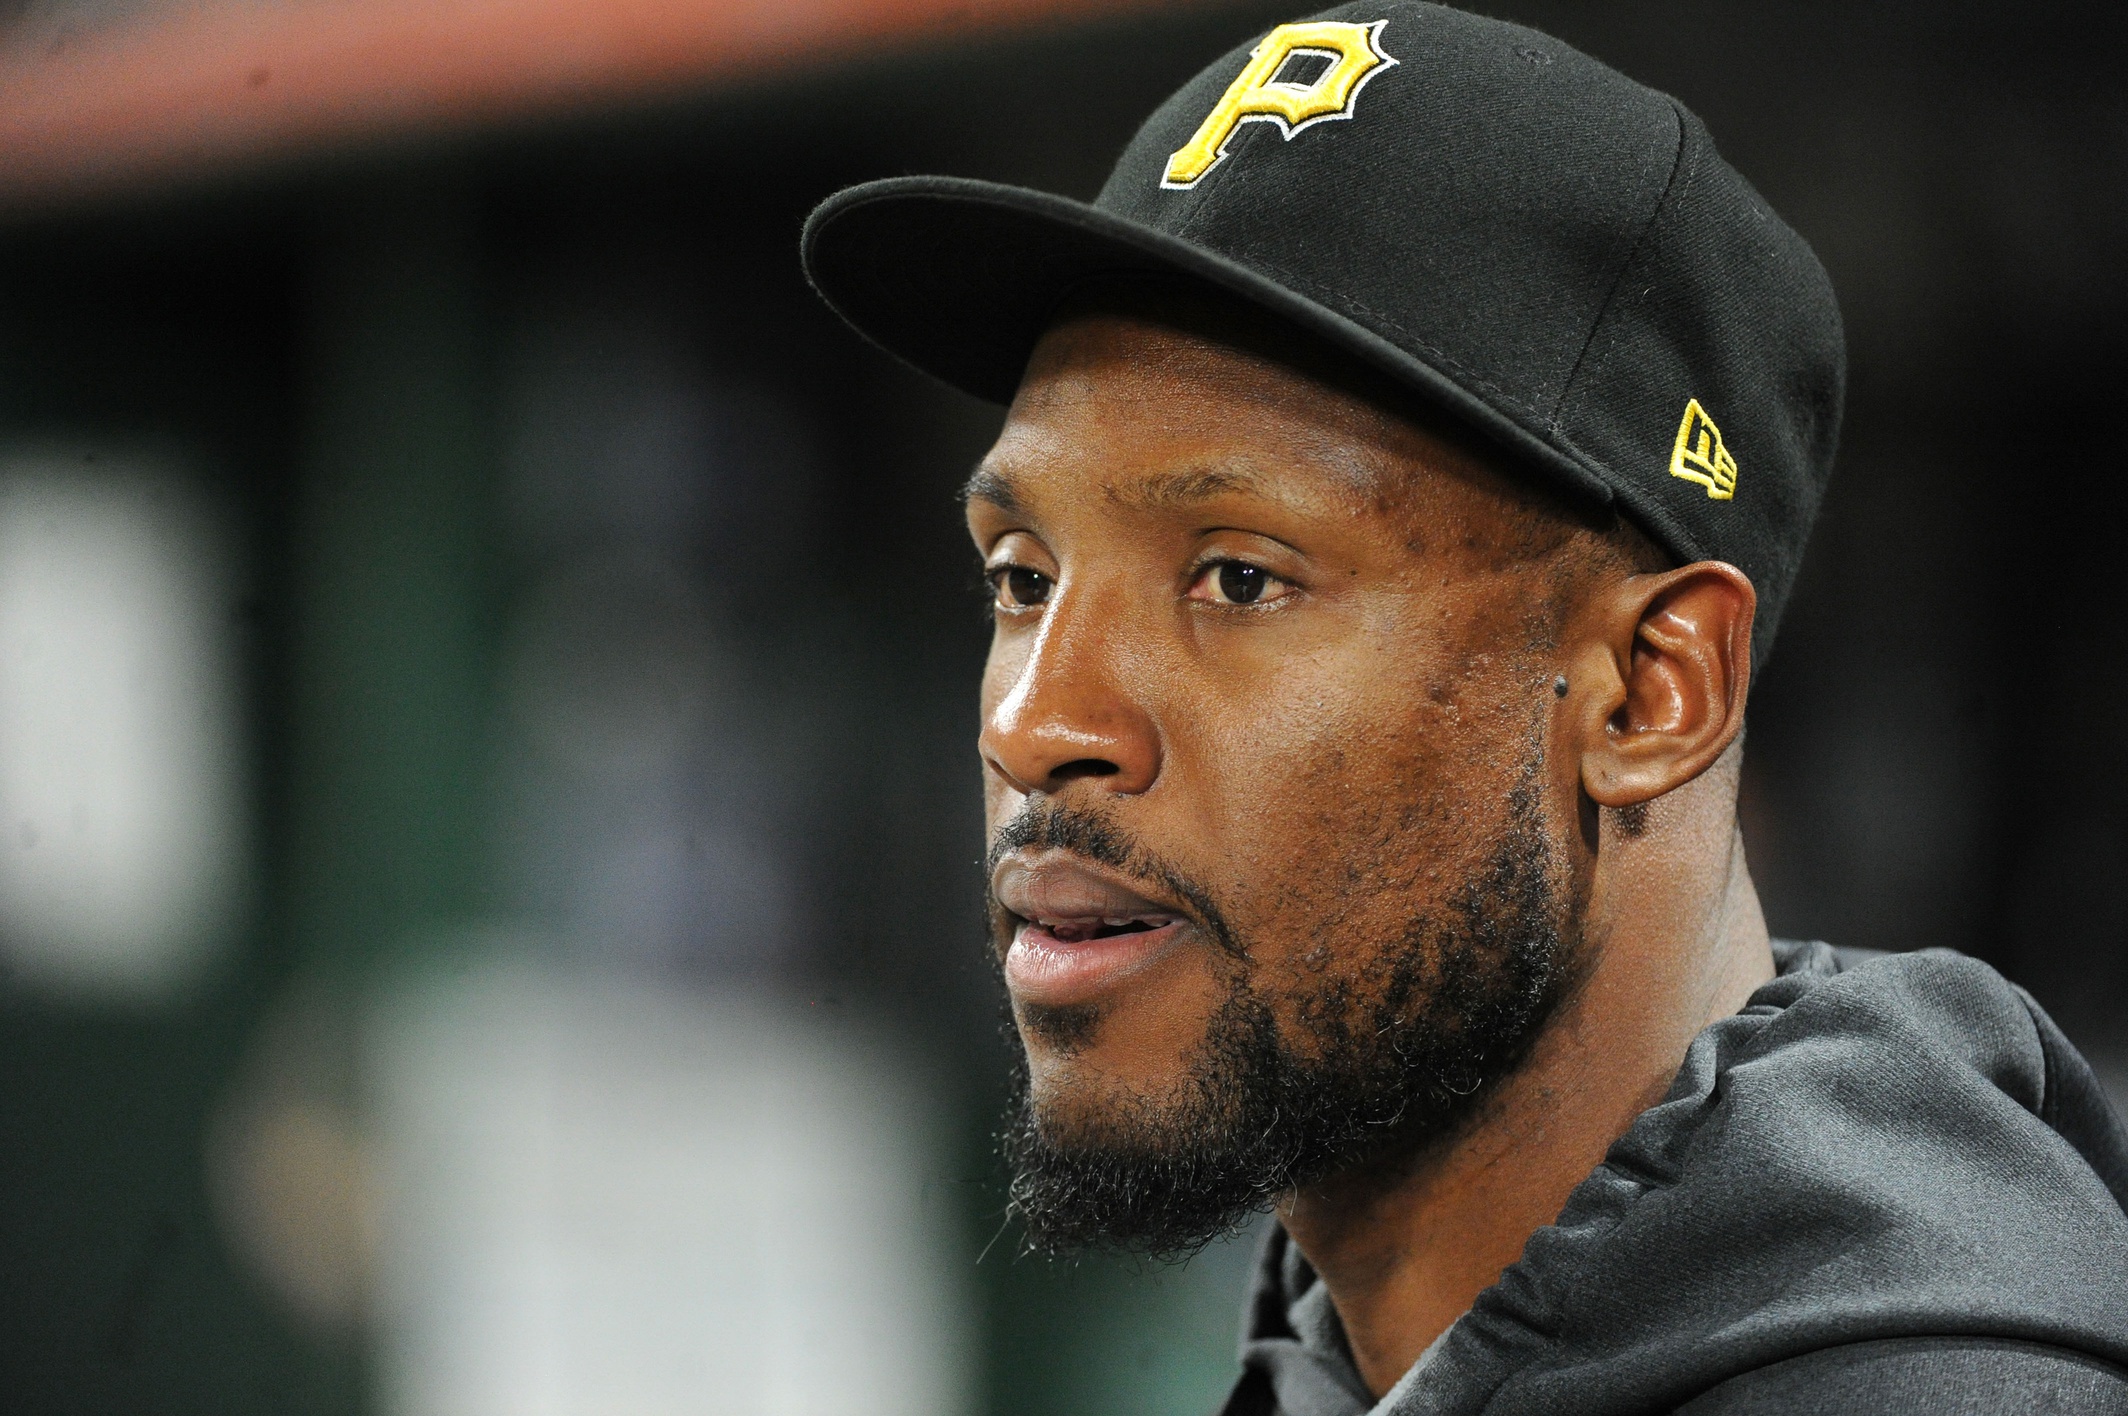 D-backs OF Starling Marte says wife dies of heart attack